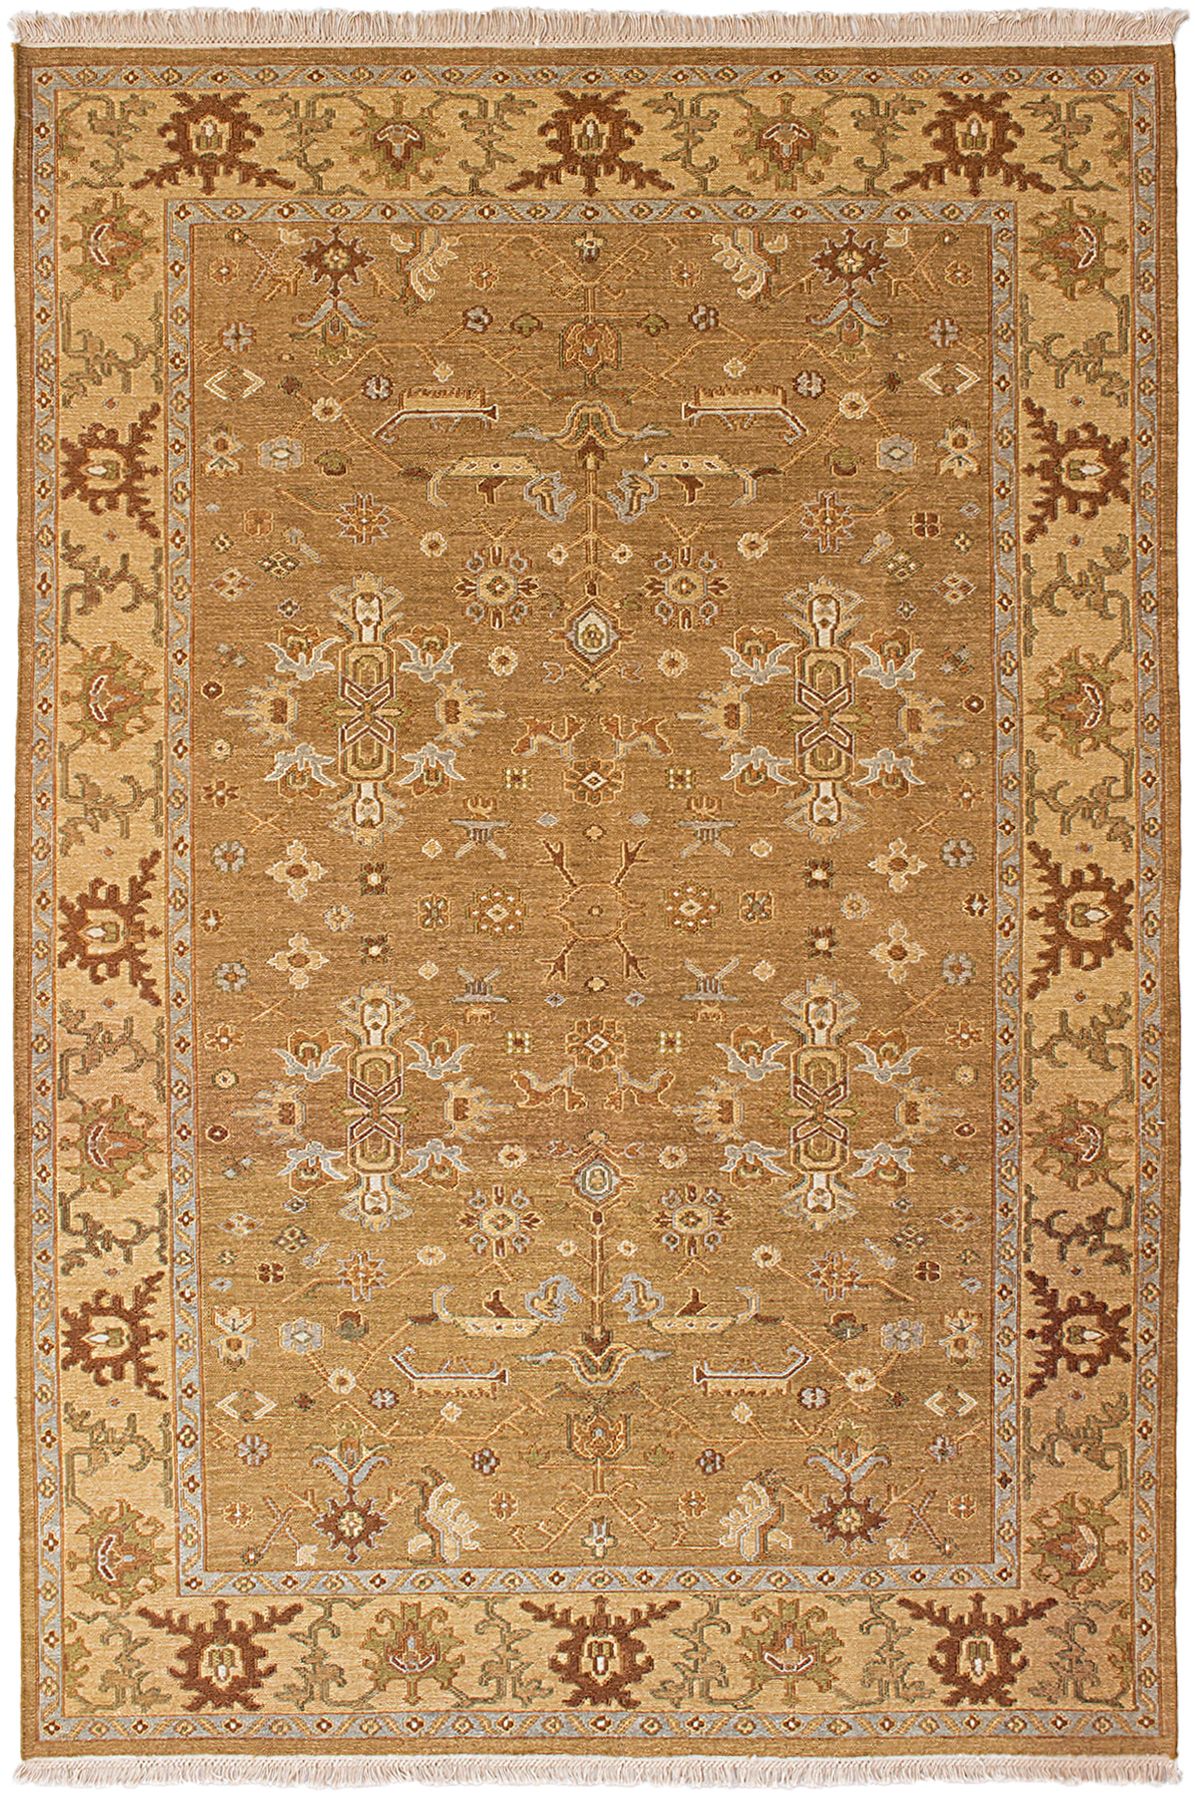 Hand woven Lahor Finest Tan Wool Tapestry Kilim 5'7" x 8'7" Size: 5'7" x 8'7"  